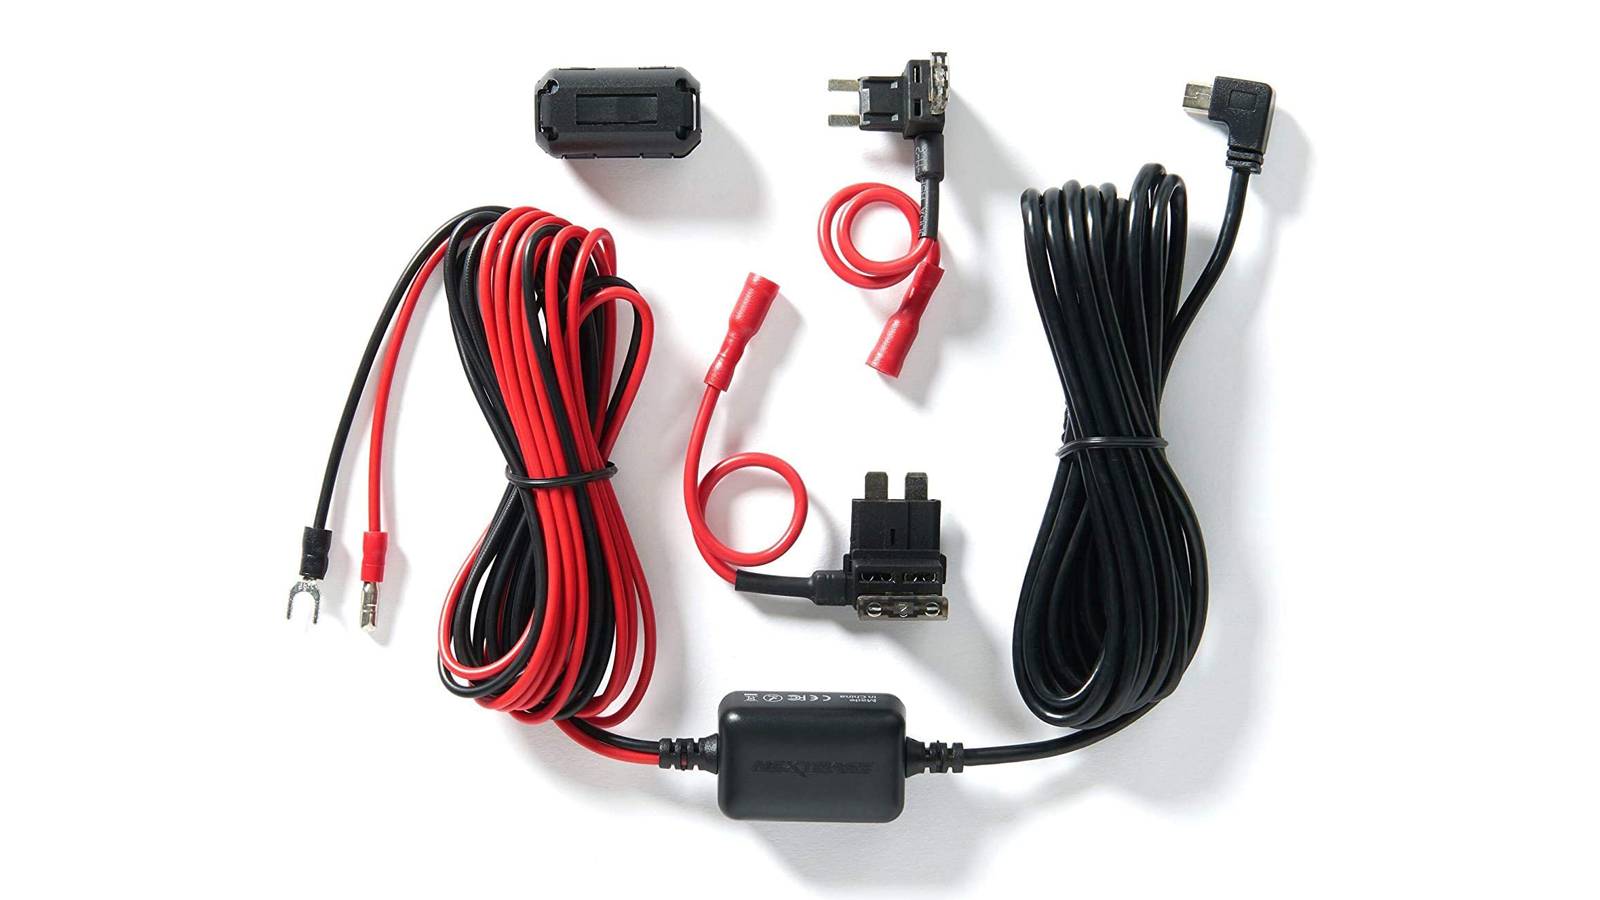 A Nextbase hardwiring cable kit for dash cams